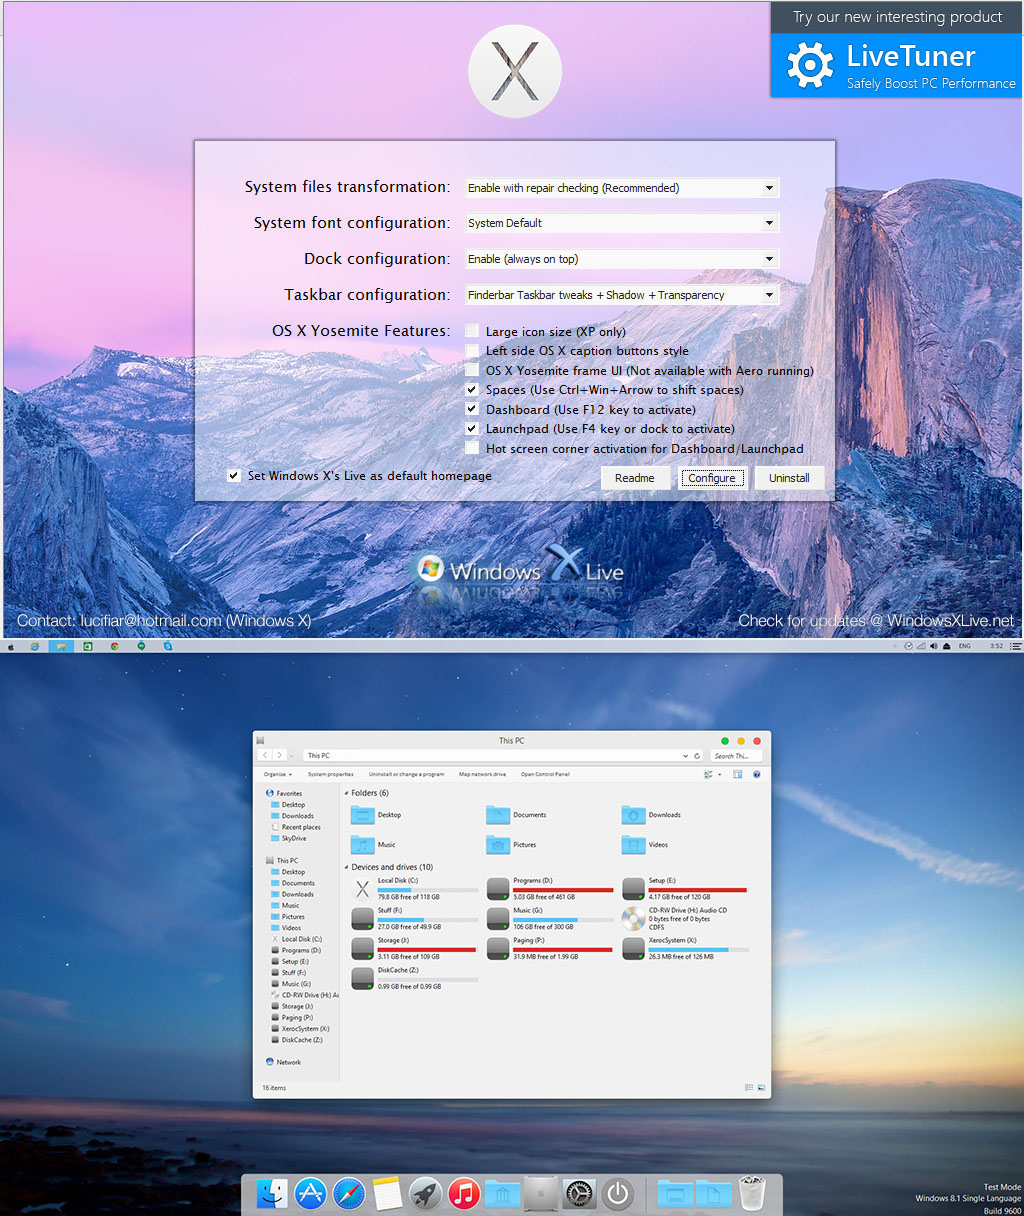 Os x yosemite transformation pack for windows 7 8.1 8 1 and 10 activation key